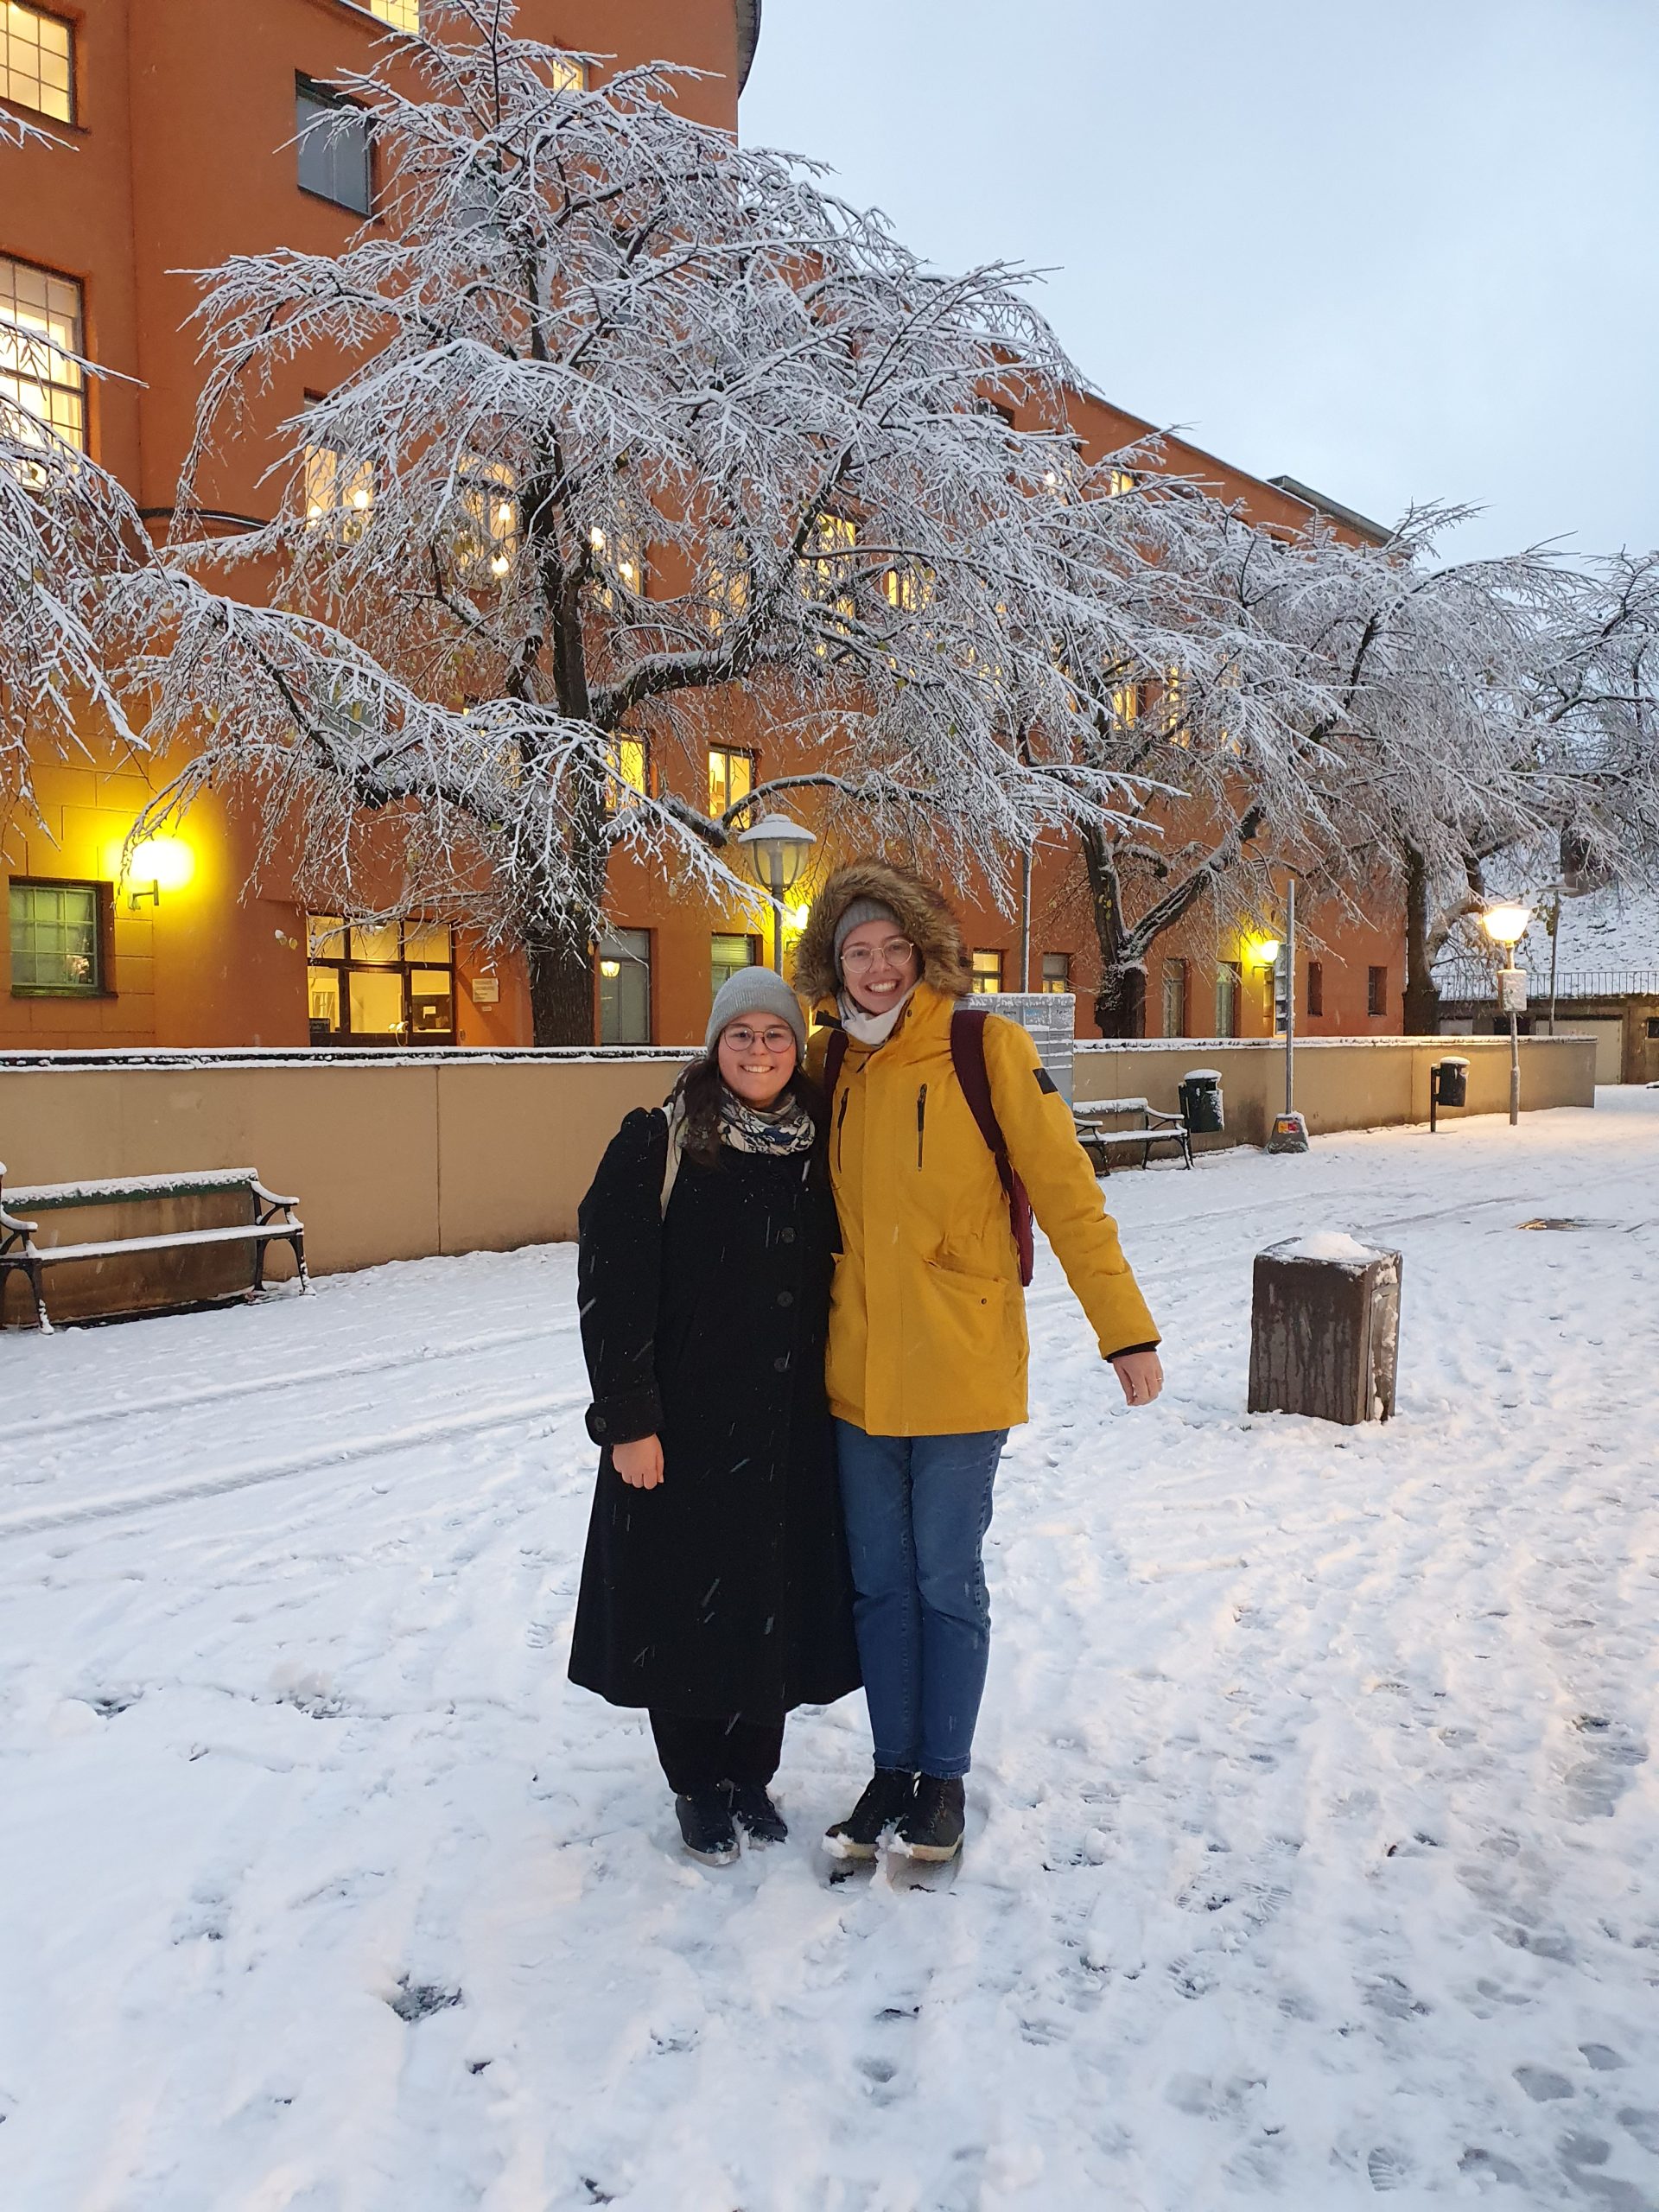 Snowy day in Stockholm with a friend. Photo credit: Mark Tamm